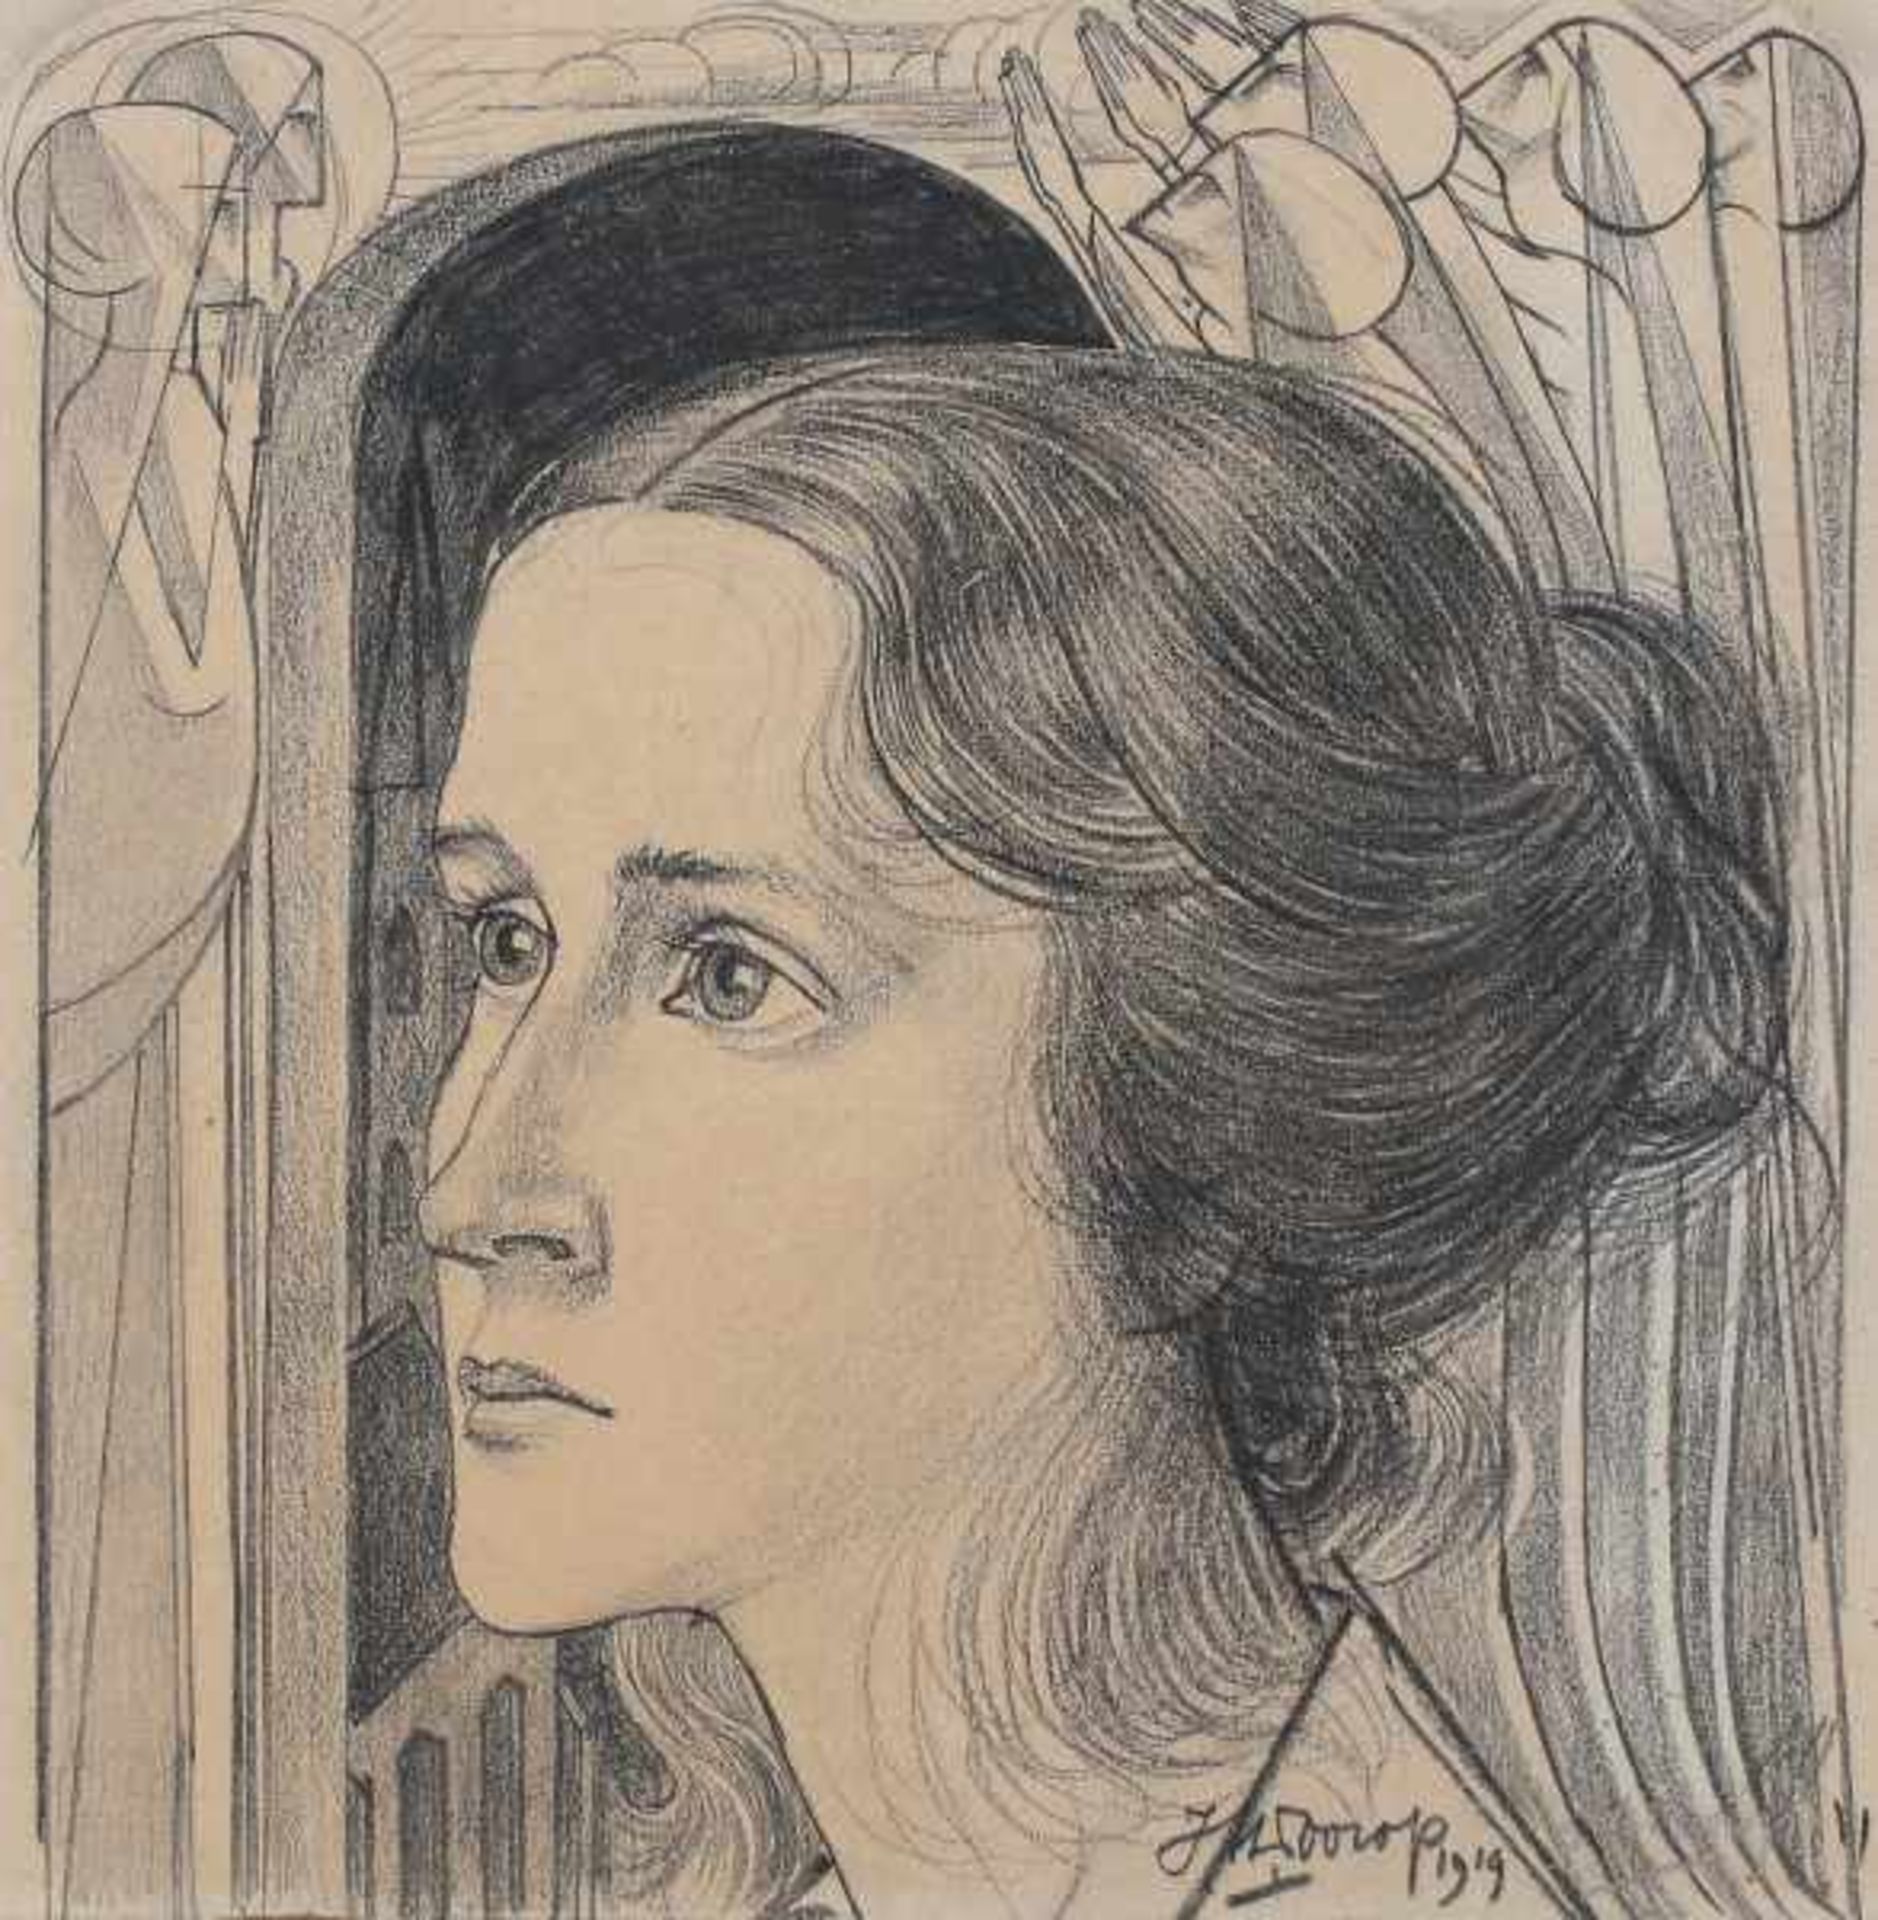 Jan Toorop (1858-1928)Portrait of a young woman. Twice signed and dated 1919 lower right.Drawing